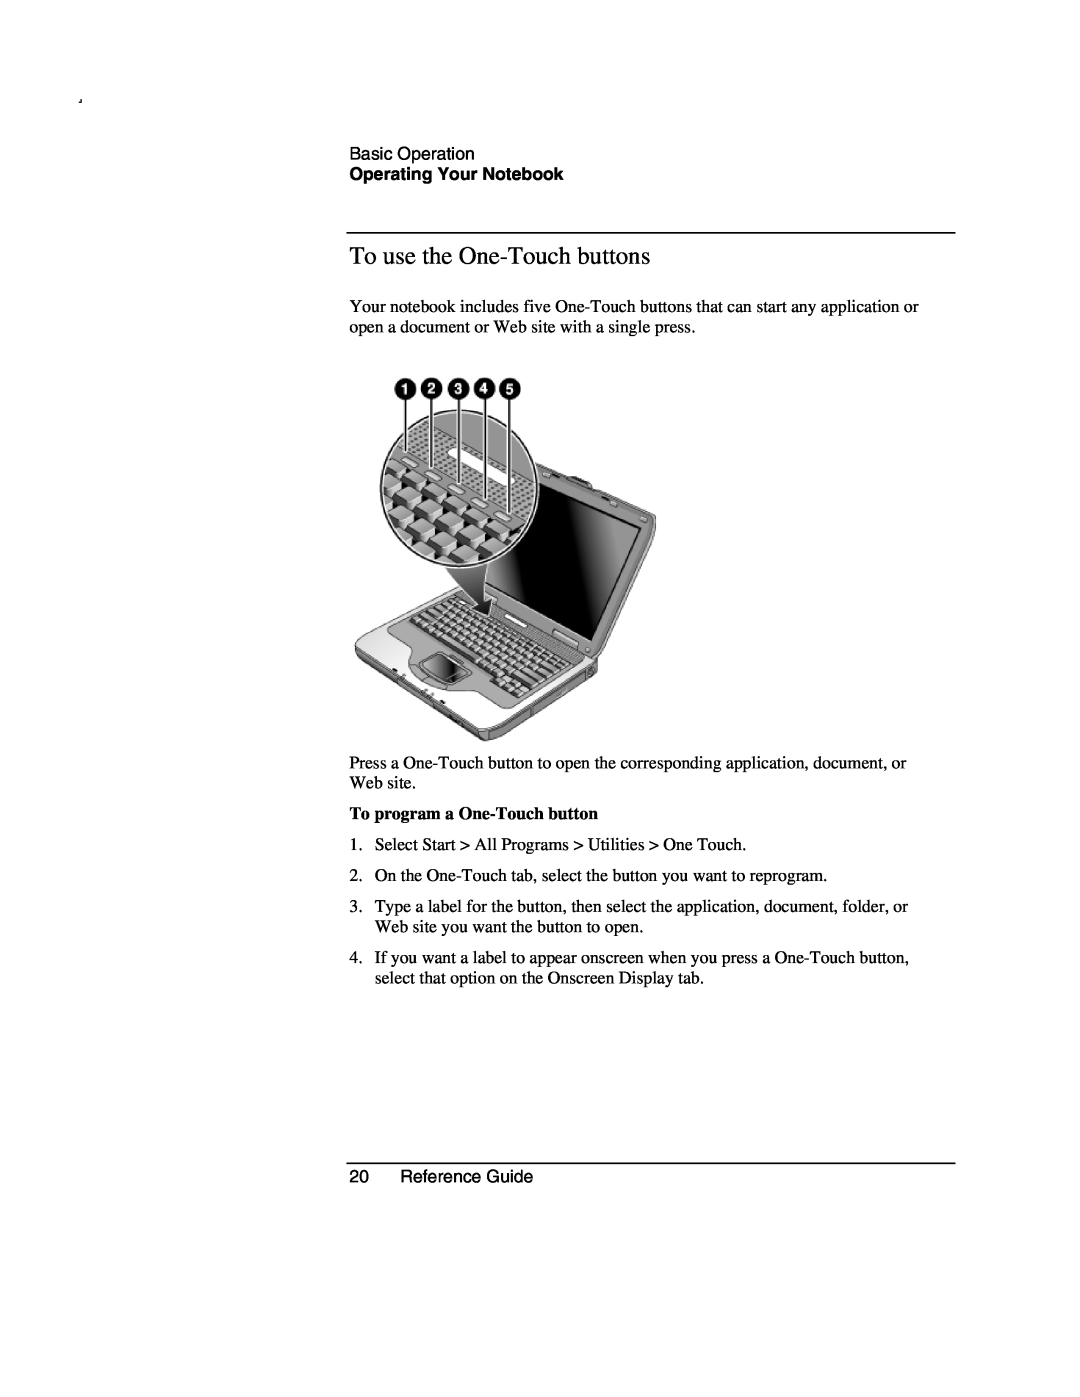 Compaq AMC20493-KT5 manual To use the One-Touch buttons, To program a One-Touch button, Operating Your Notebook 